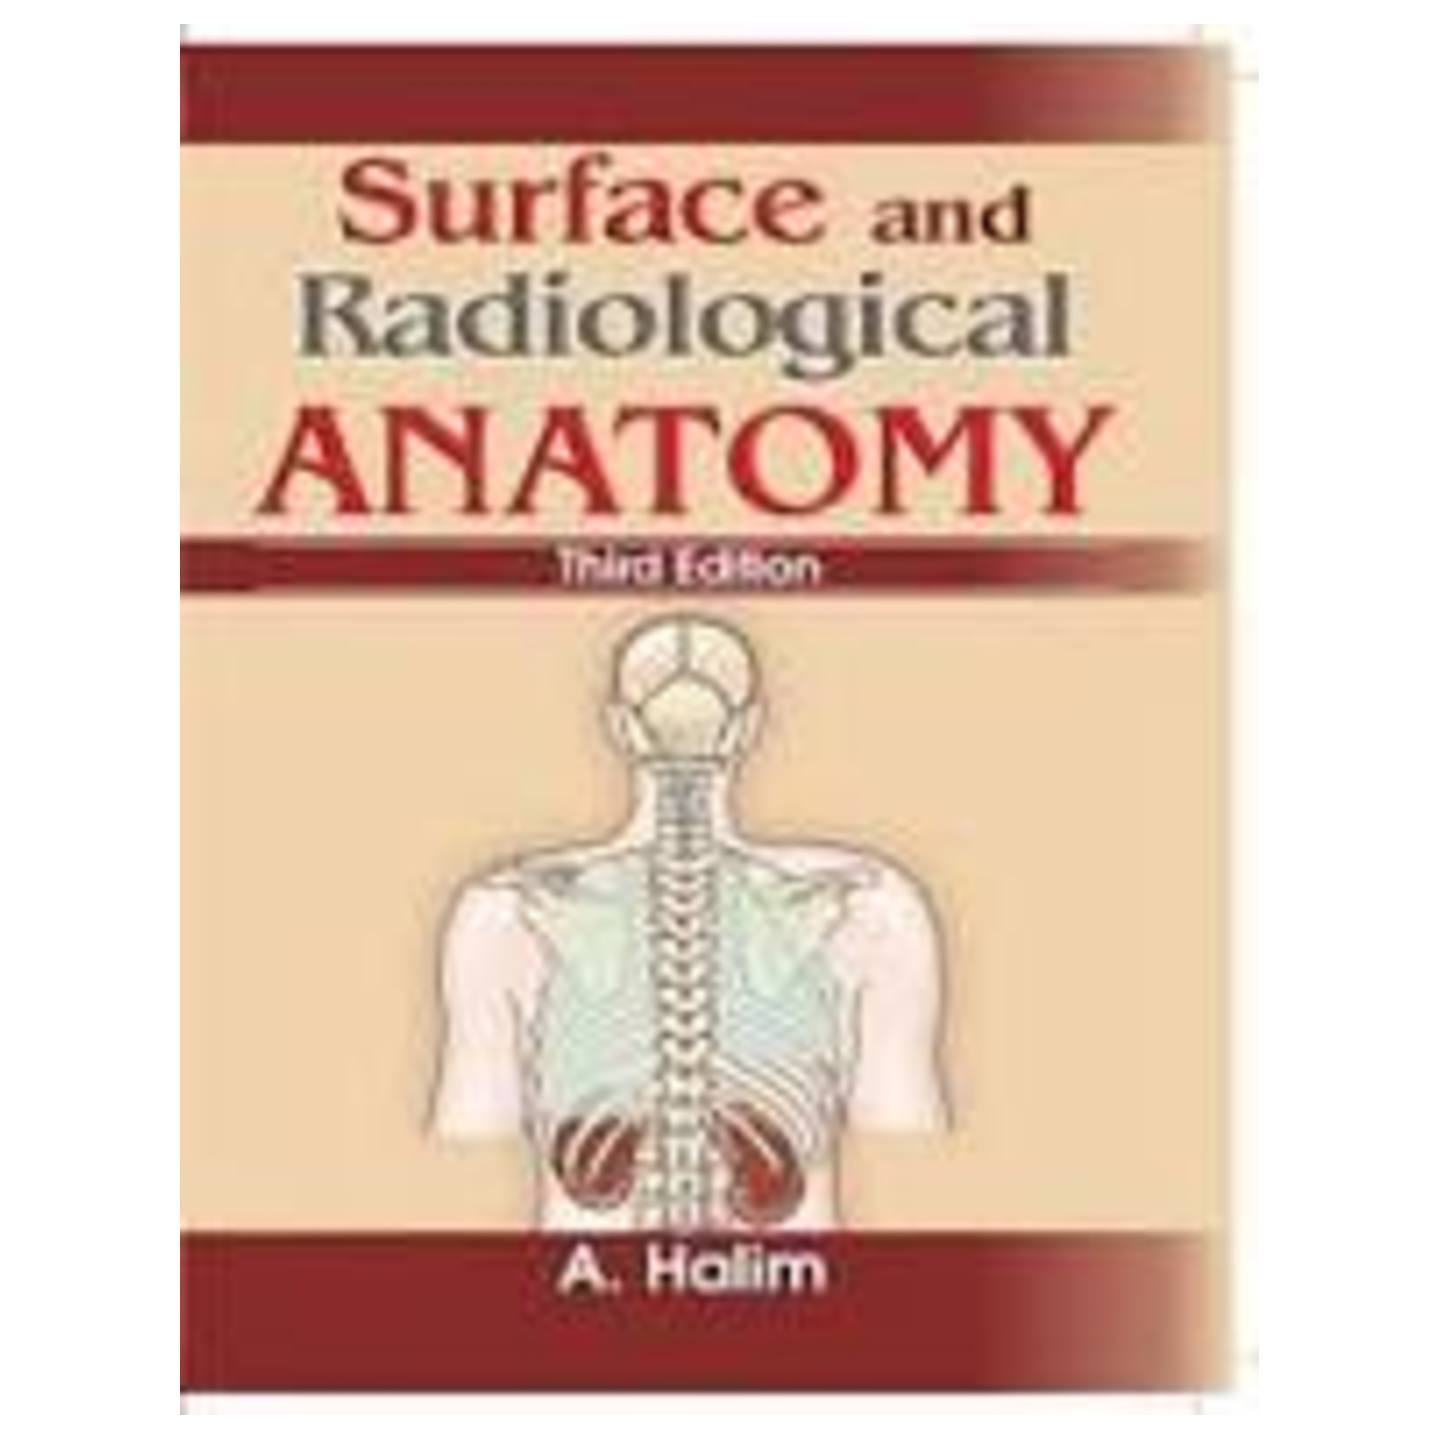 Surface and Radiological Anatomy  (English, Paperback, Halim A.)